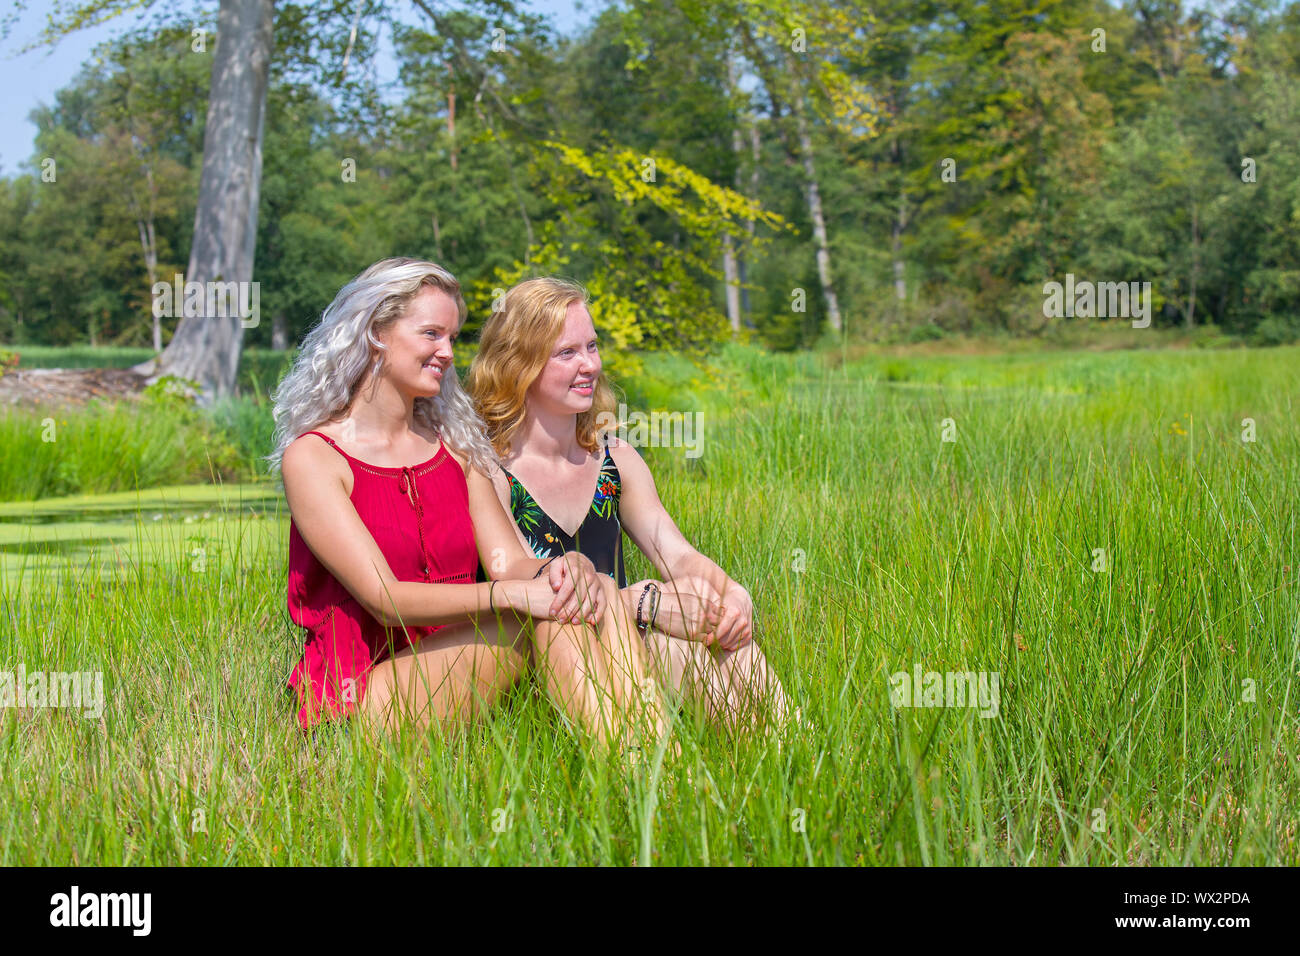 Two young women sit together in nature Stock Photo